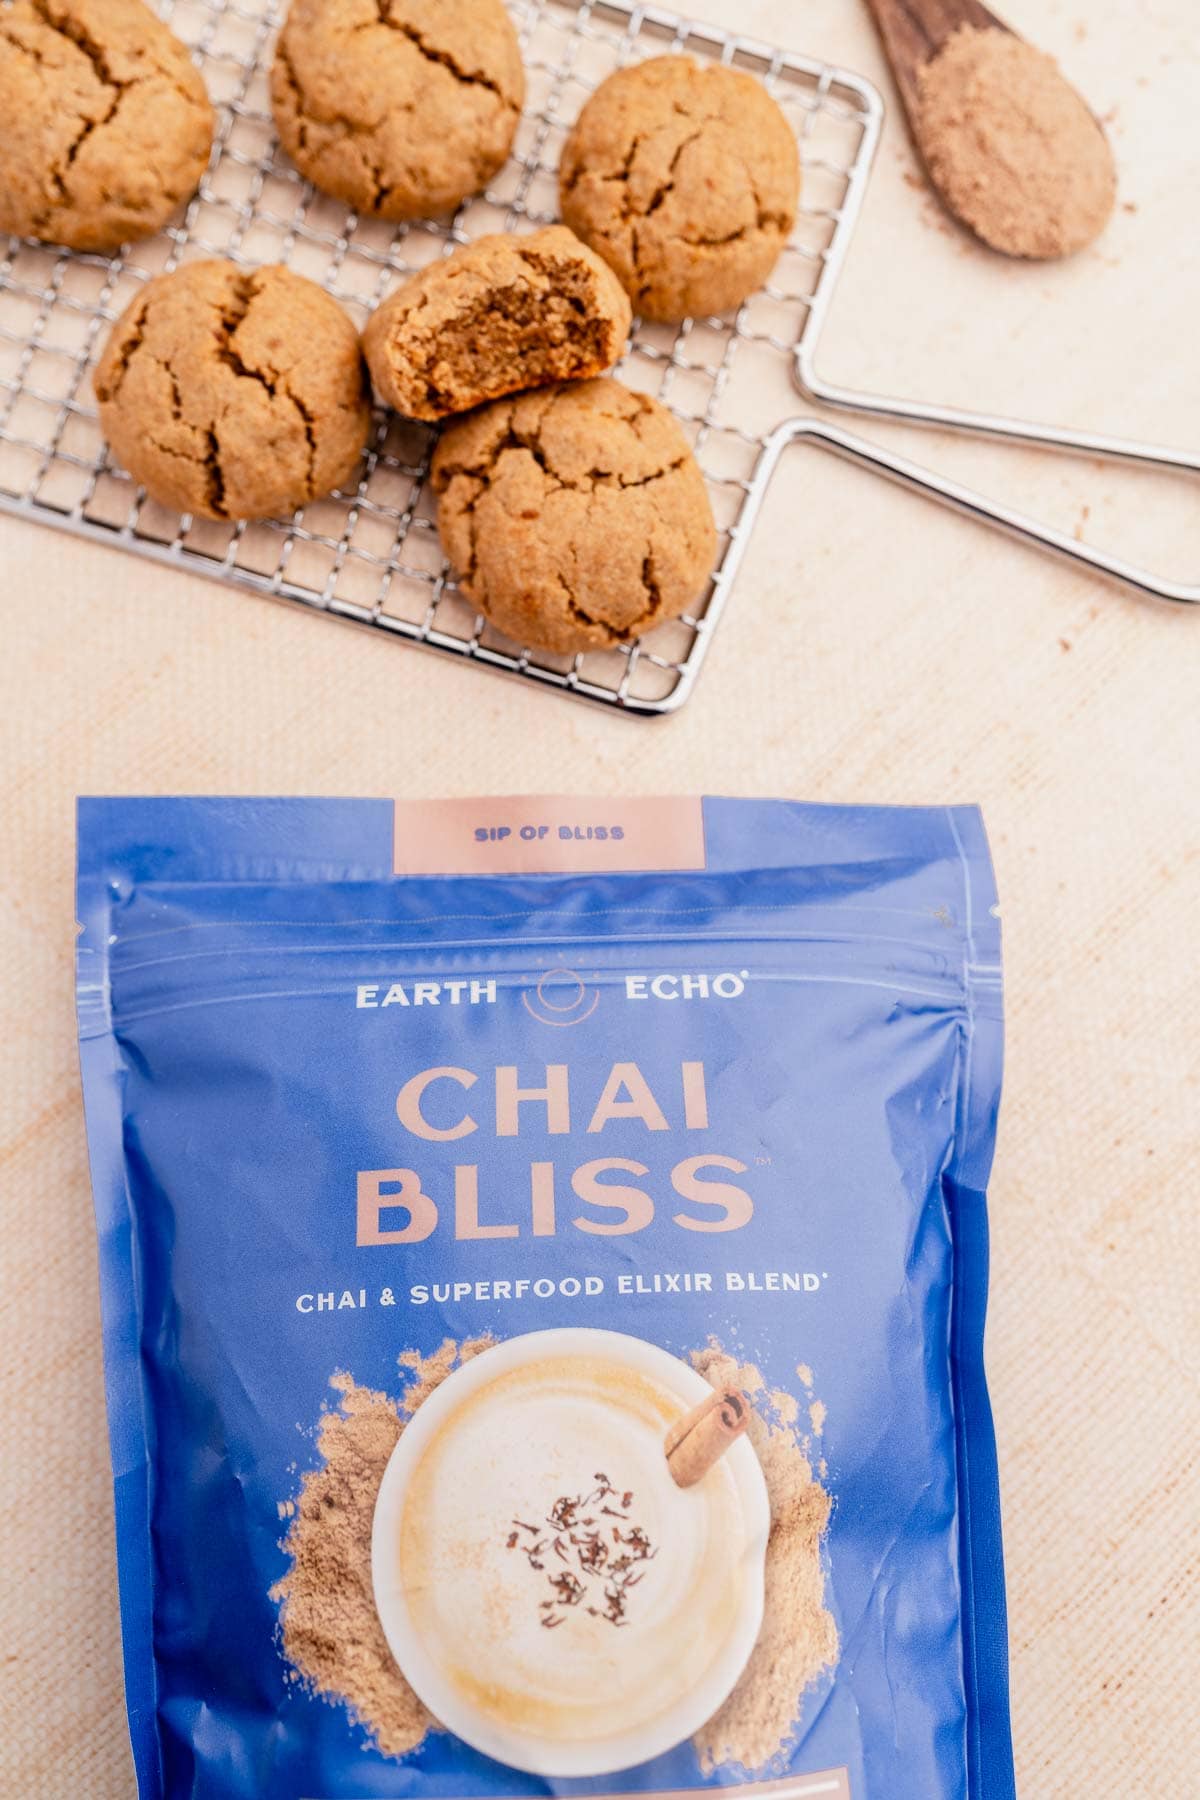           A bag of ginger chai cookies next to a cup of coffee.